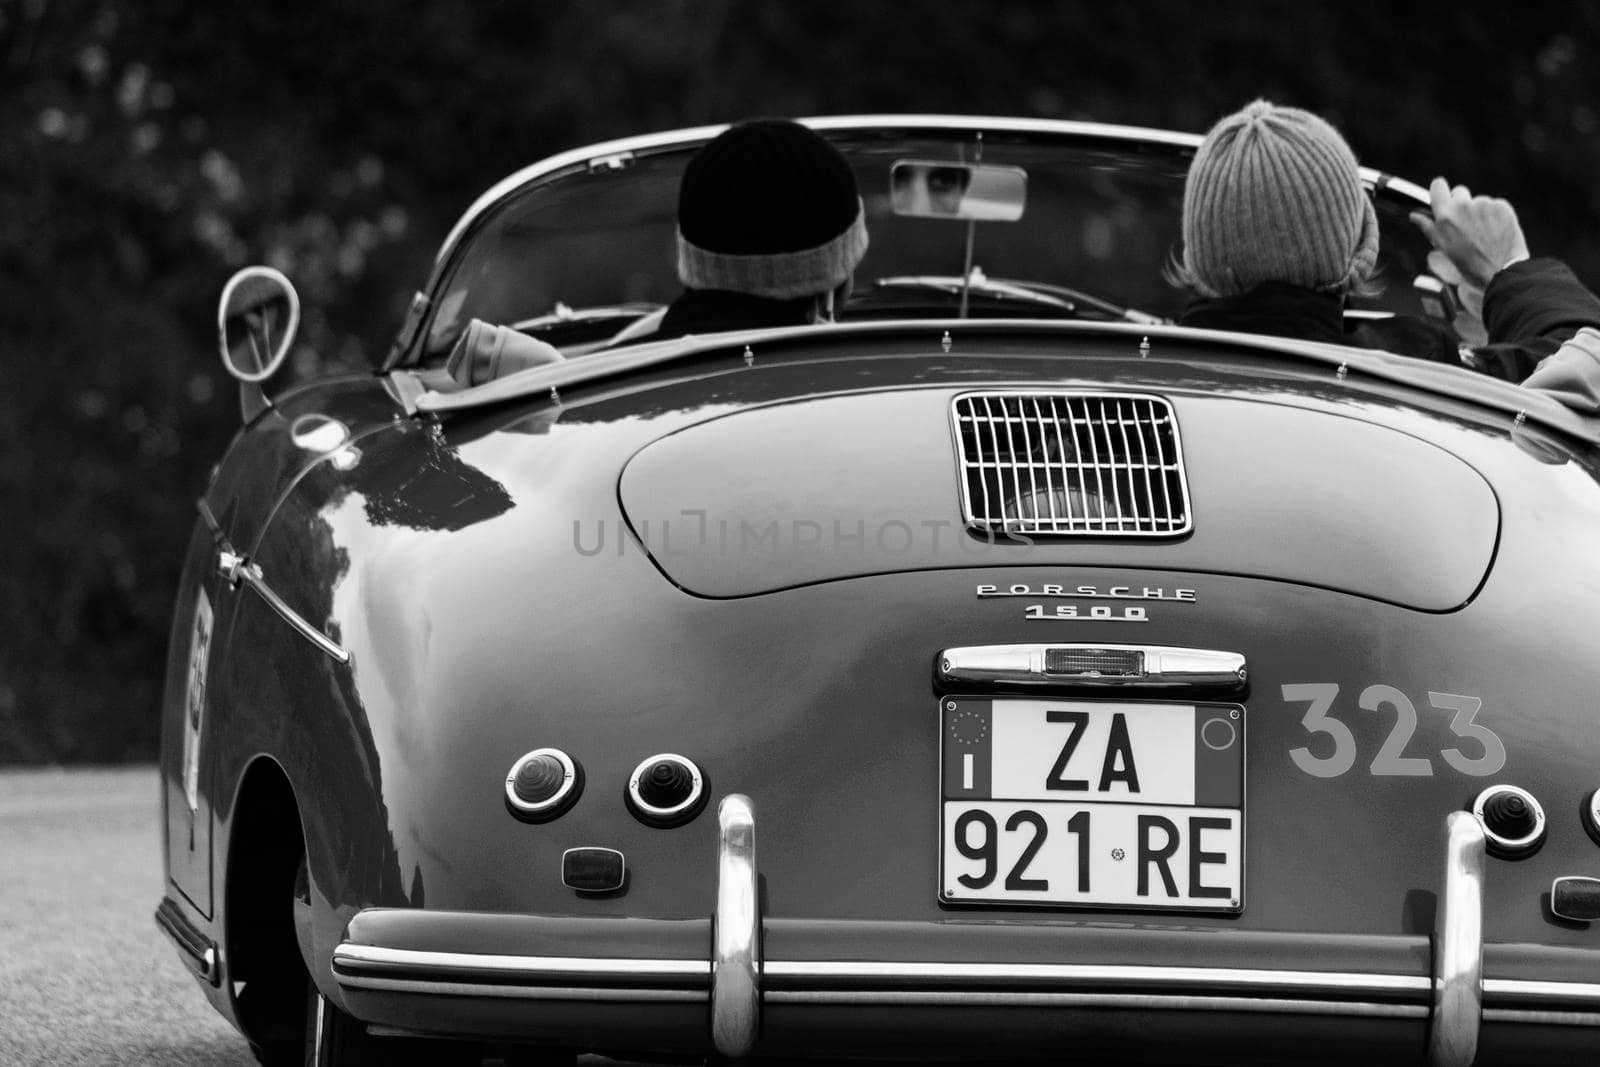 CAGLI , ITALY - OTT 24 - 2020 : PORSCHE 356 1500 SPEEDSTER 1955 on an old racing car in rally Mille Miglia 2020 the famous italian historical race (1927-1957